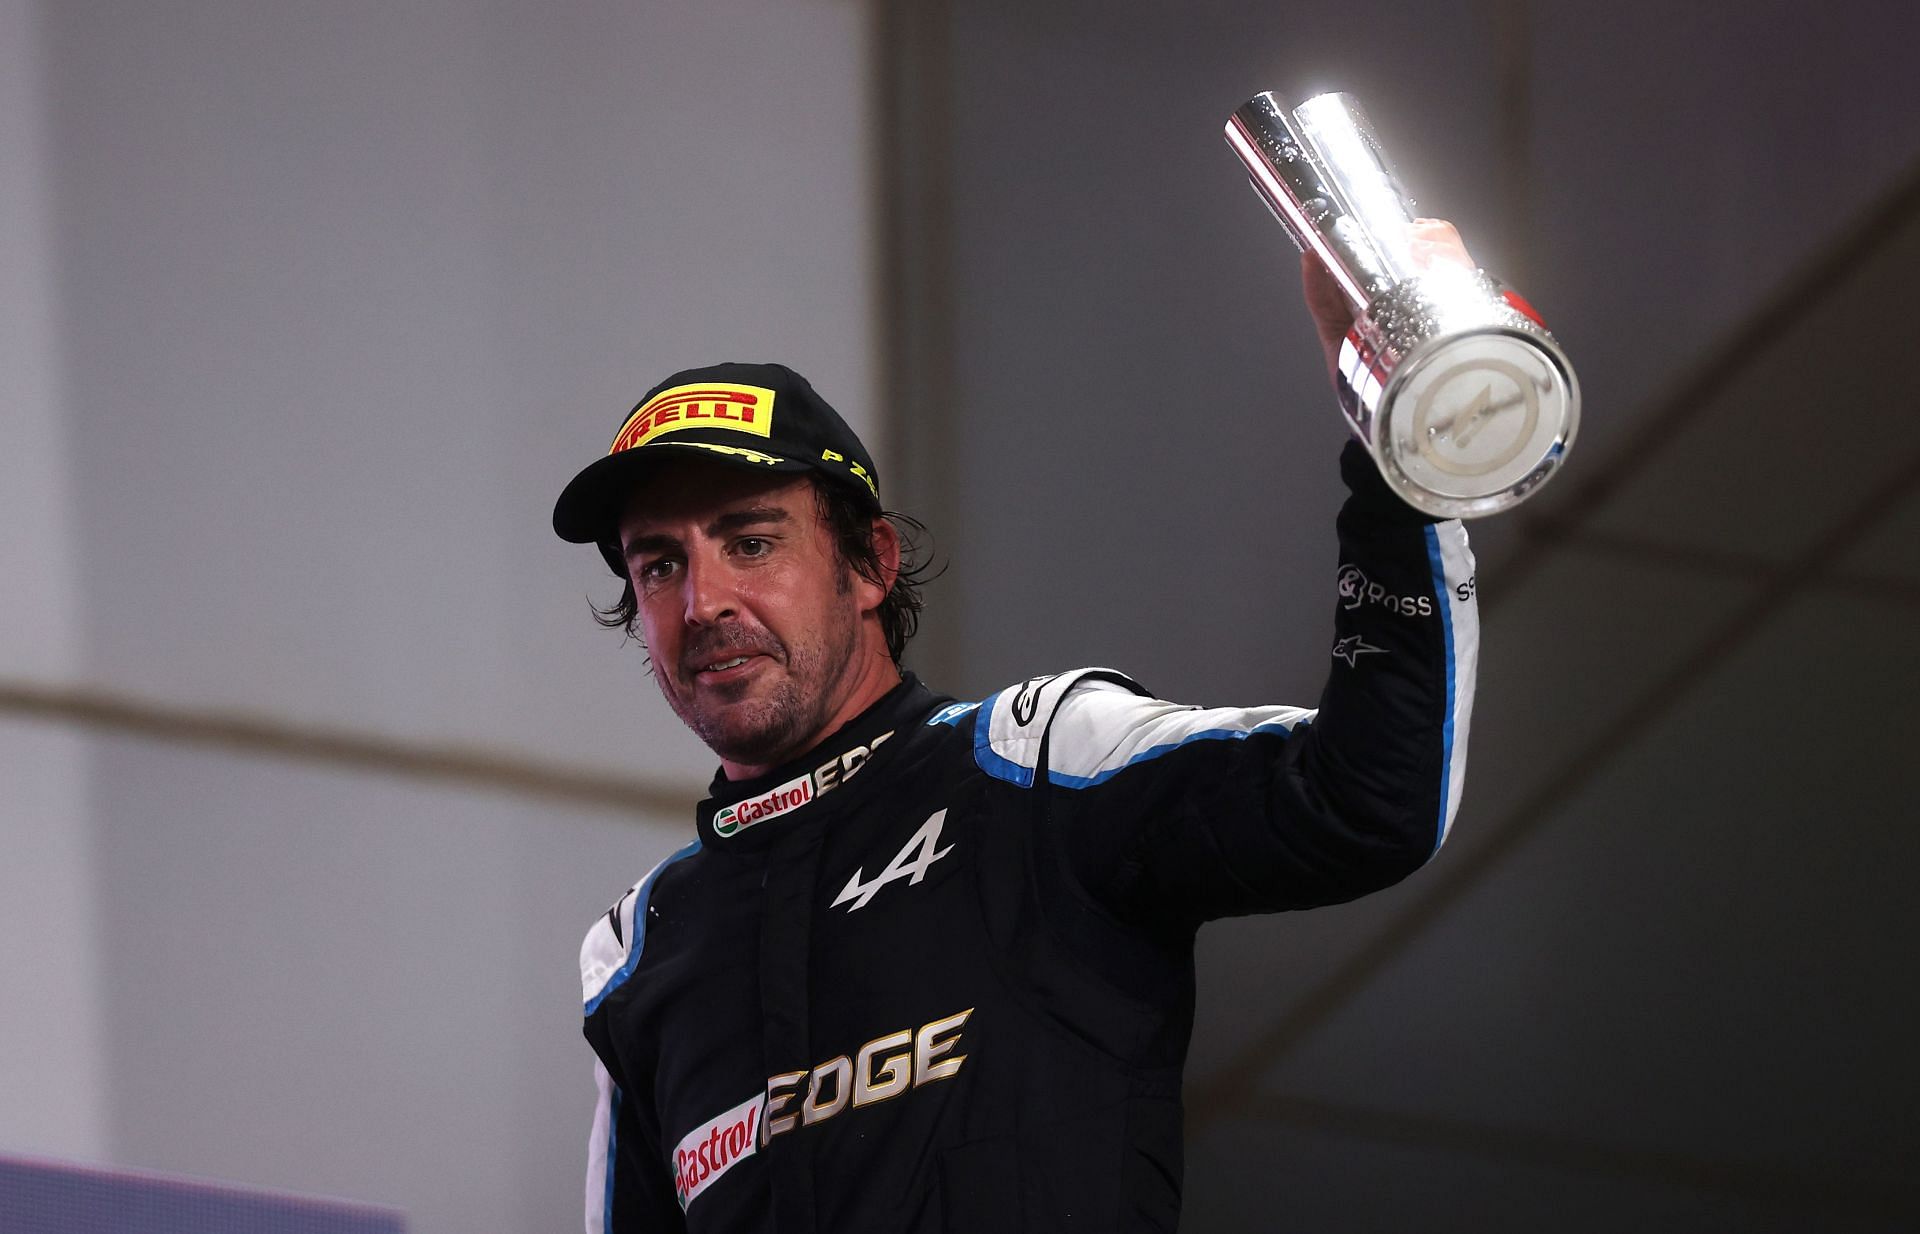 Fernando Alonso has not had his fair share of luck throughout his career (Photo by Lars Baron/Getty Images)